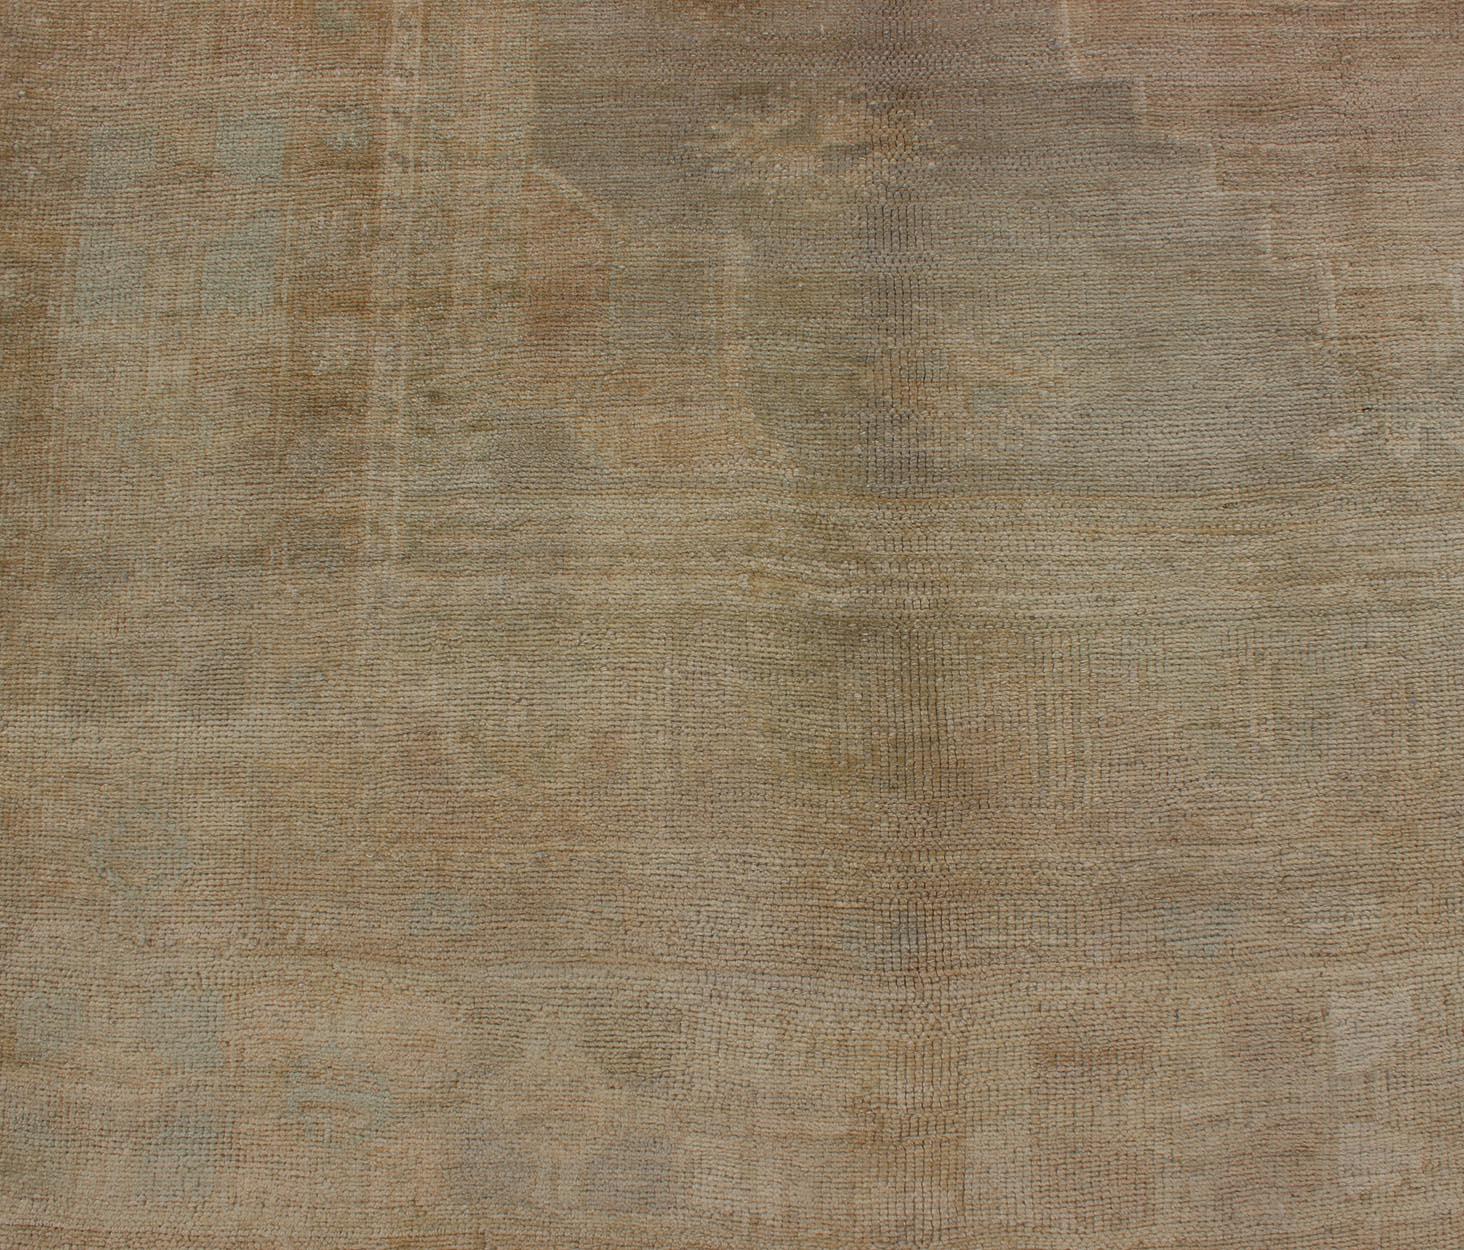 Faded Vintage Turkish Oushak Medallion Rug in Taupe, Tan, Gray 3